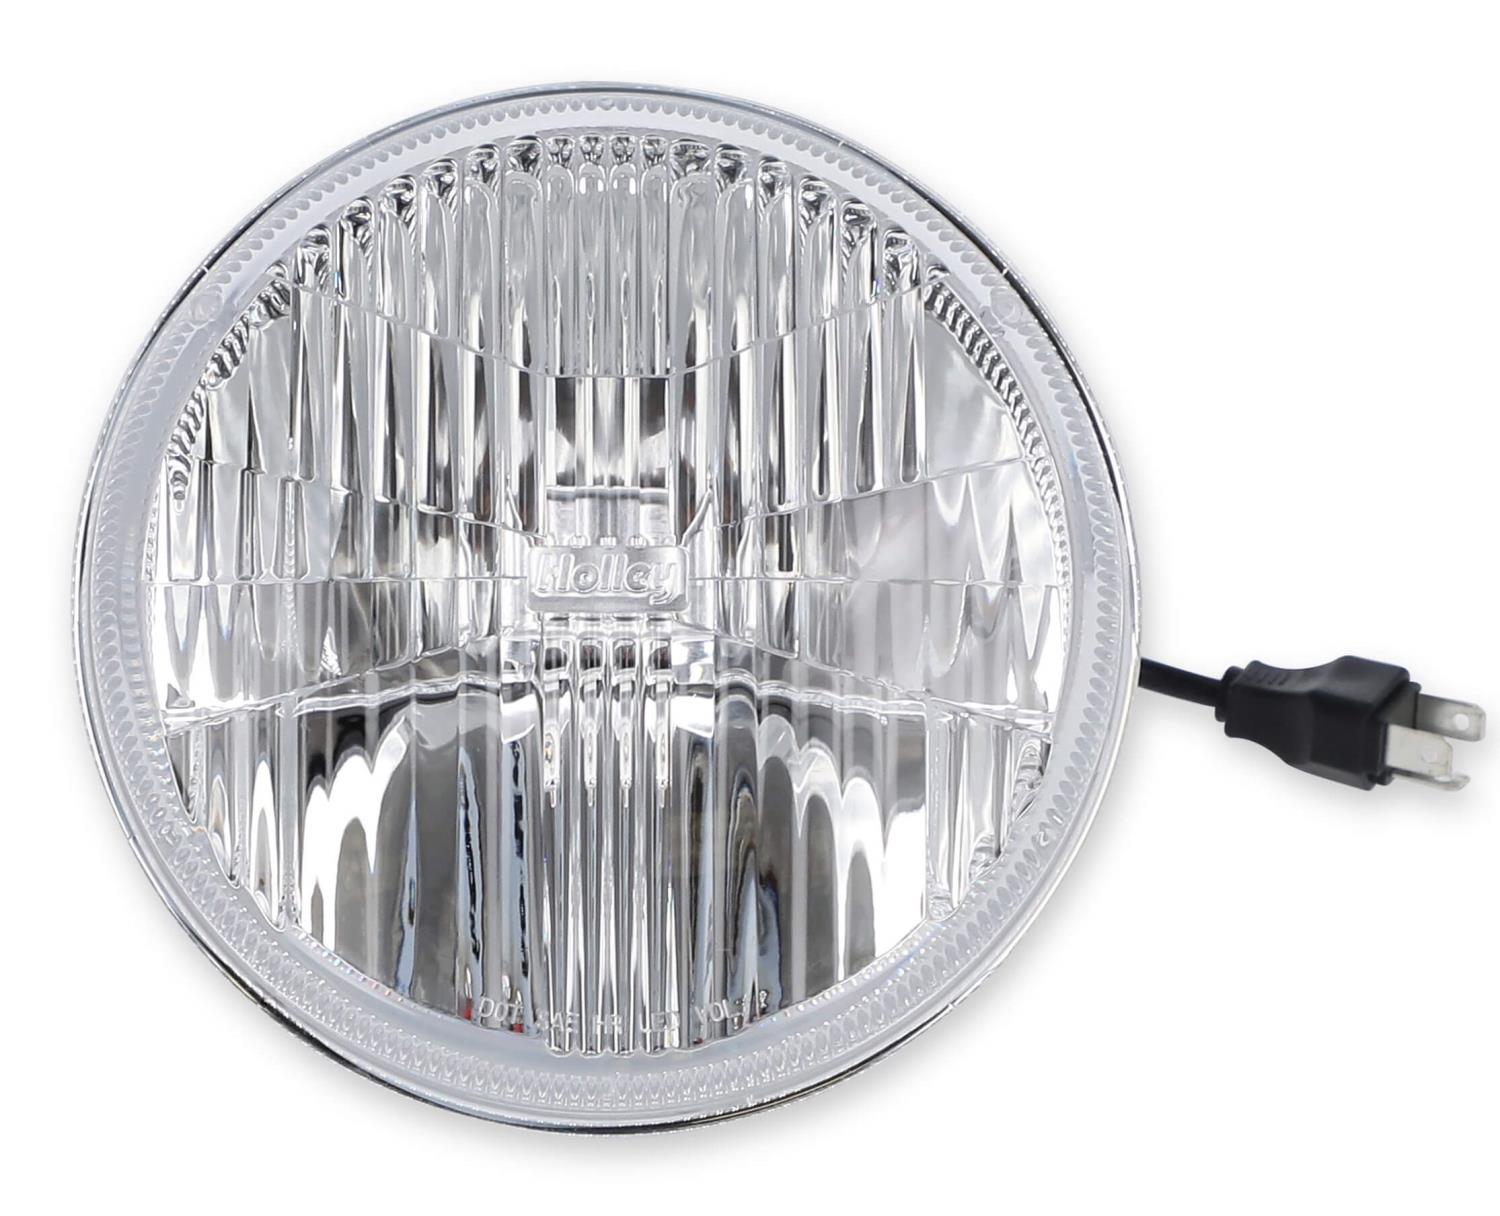 LFRB155 LFRB155 RetroBright LED 7 in. Round Headlight for Select 1930-2006 Vehicles with Round Headlight Grille [Modern White]